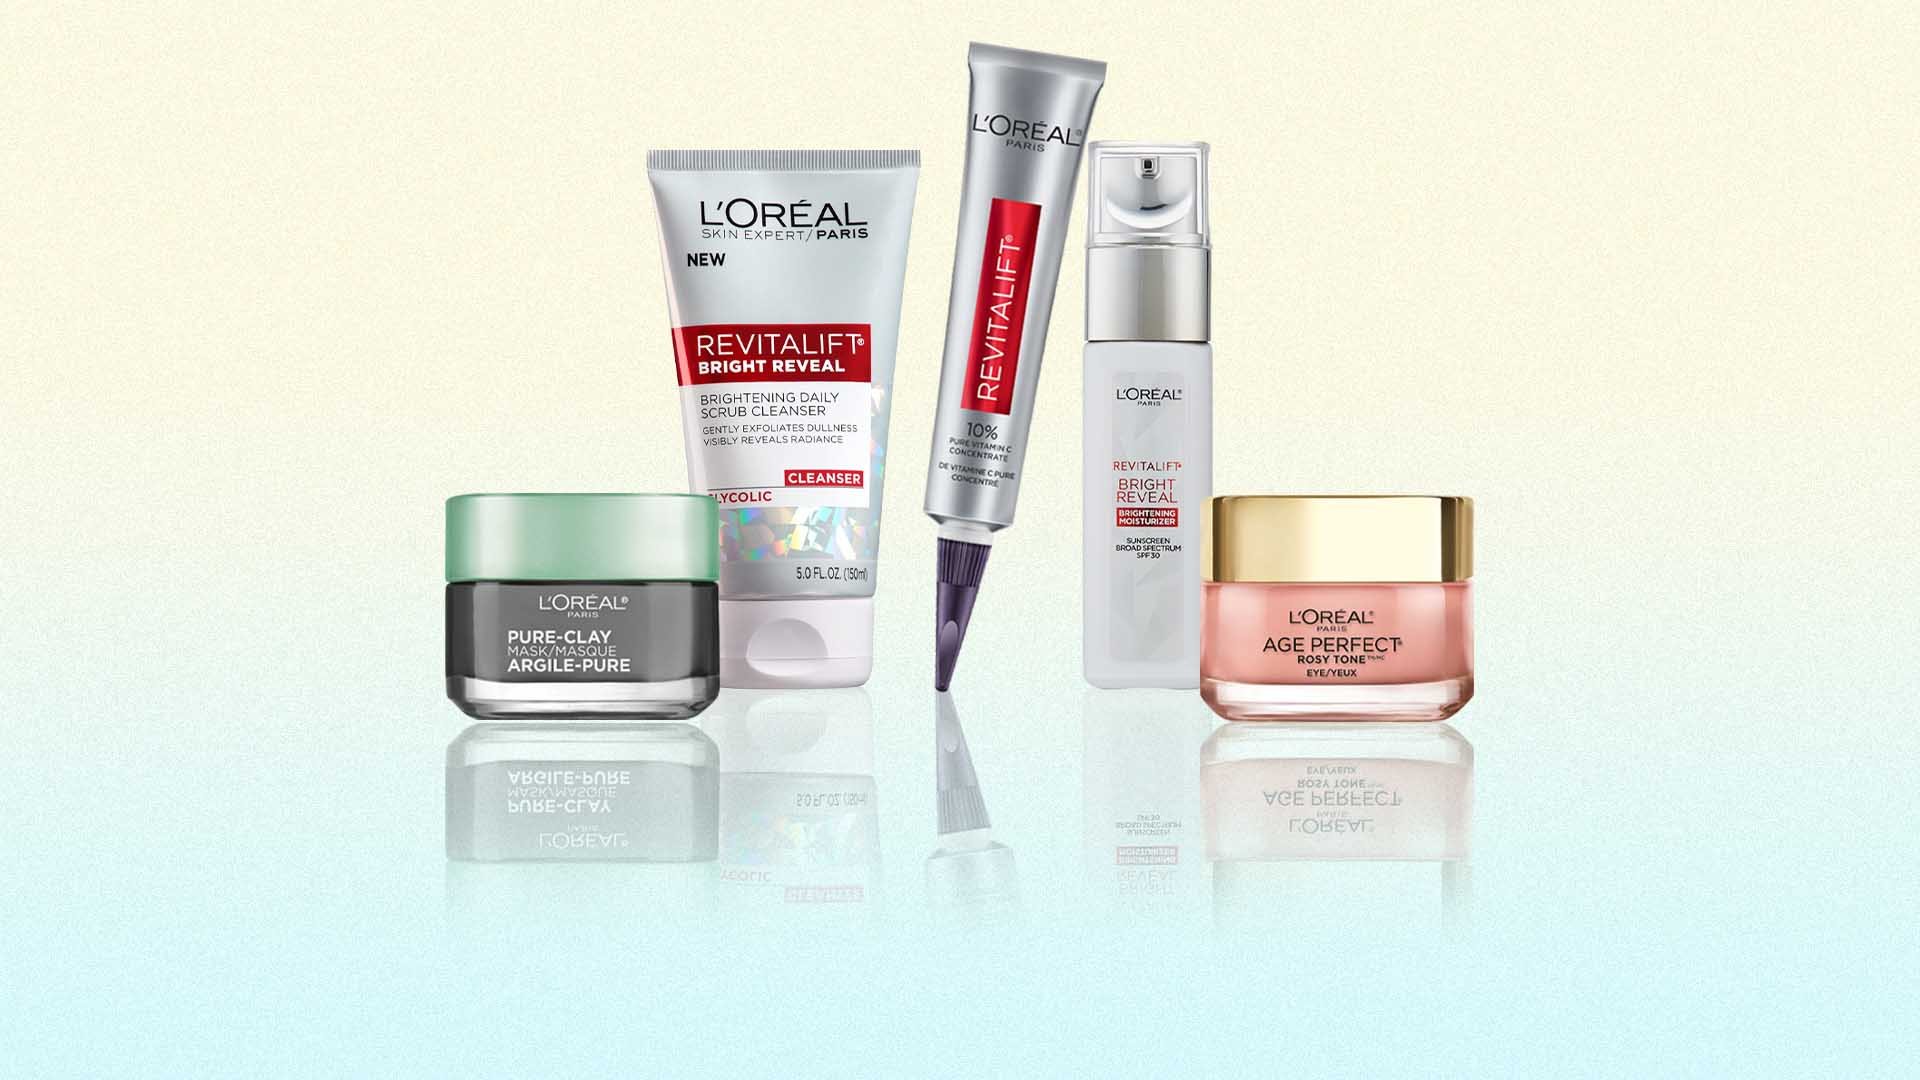 Loreal Paris Article 9 Skin Brightening Products For Dull Skin D